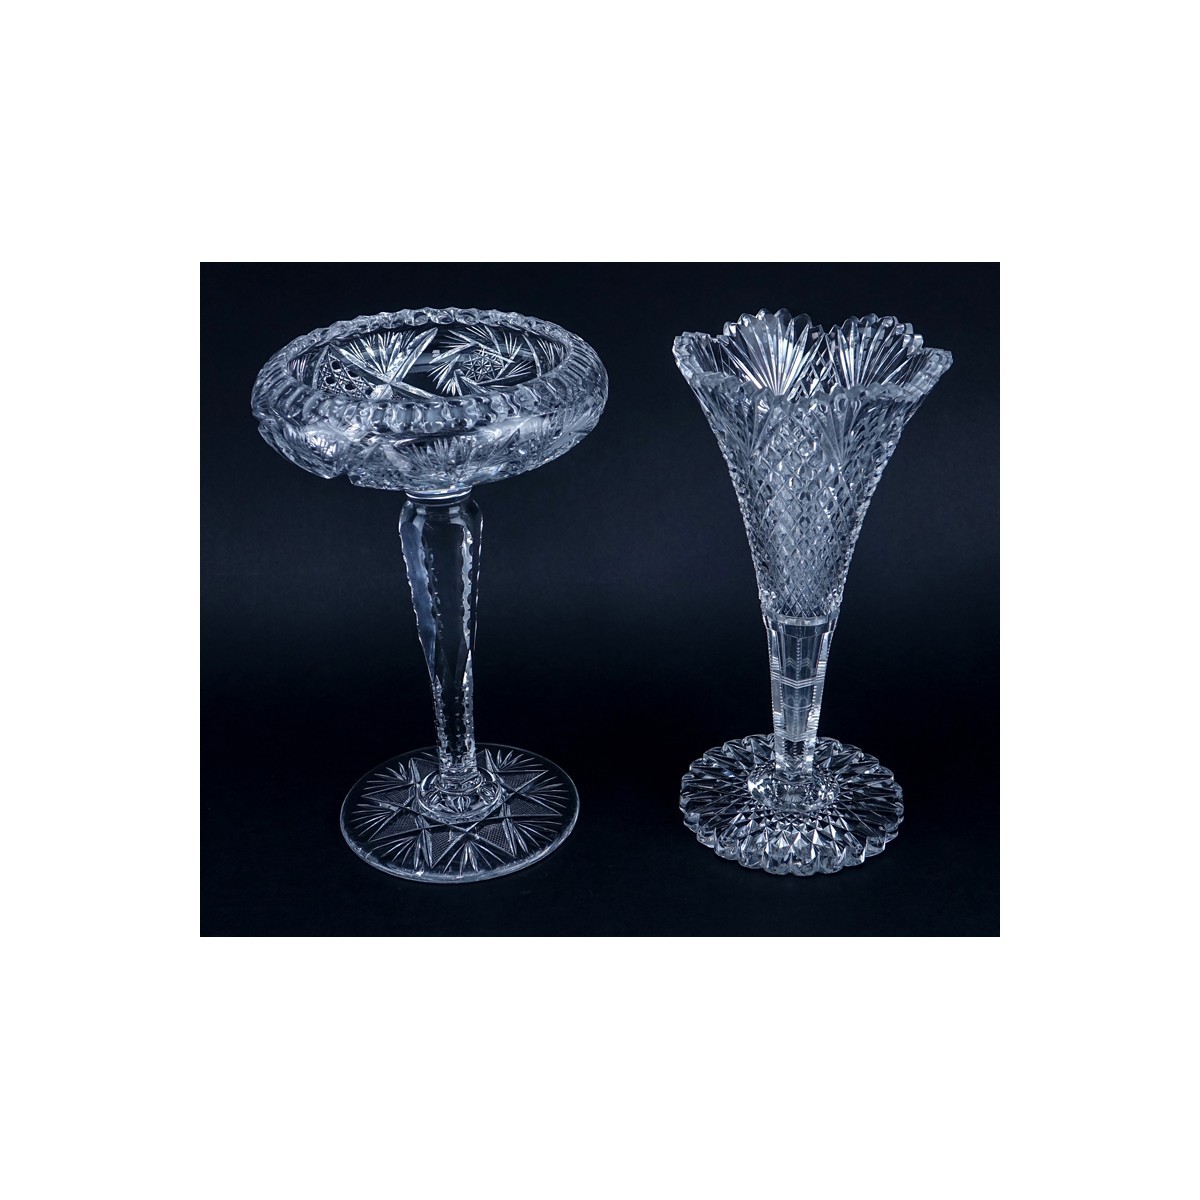 Grouping of Five (5) Cut Crystal Tableware. Includes: compote, vase, covered box, and 2 open bowls.